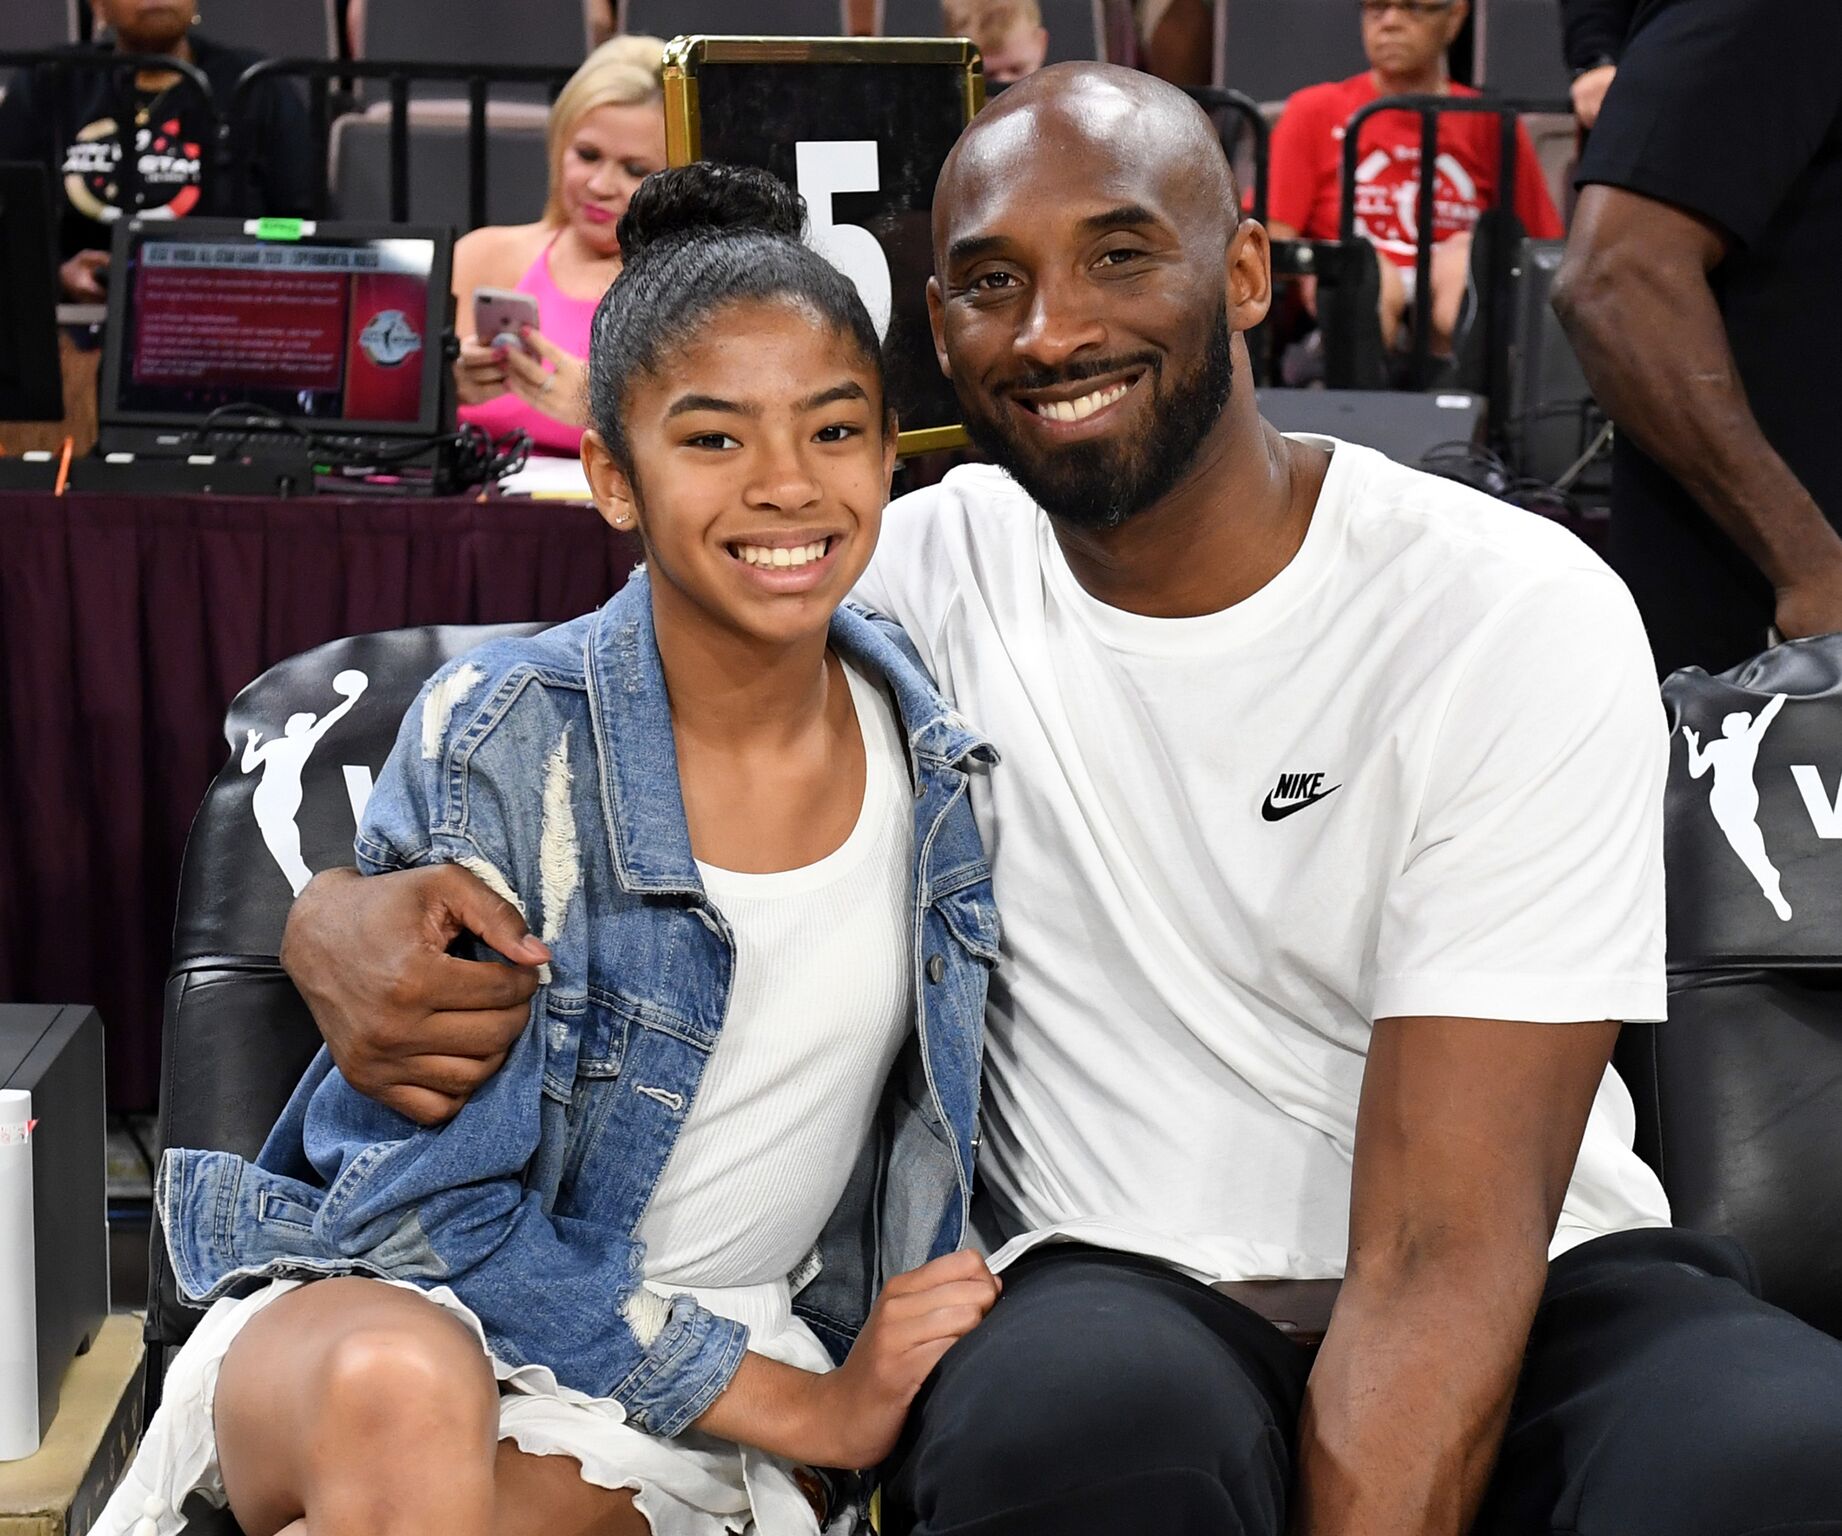 Gianna Bryant and her father, former NBA player Kobe Bryant, attend the WNBA All-Star Game 2019 at the Mandalay Bay Events Center on July 27, 2019 | Photo: Getty Images